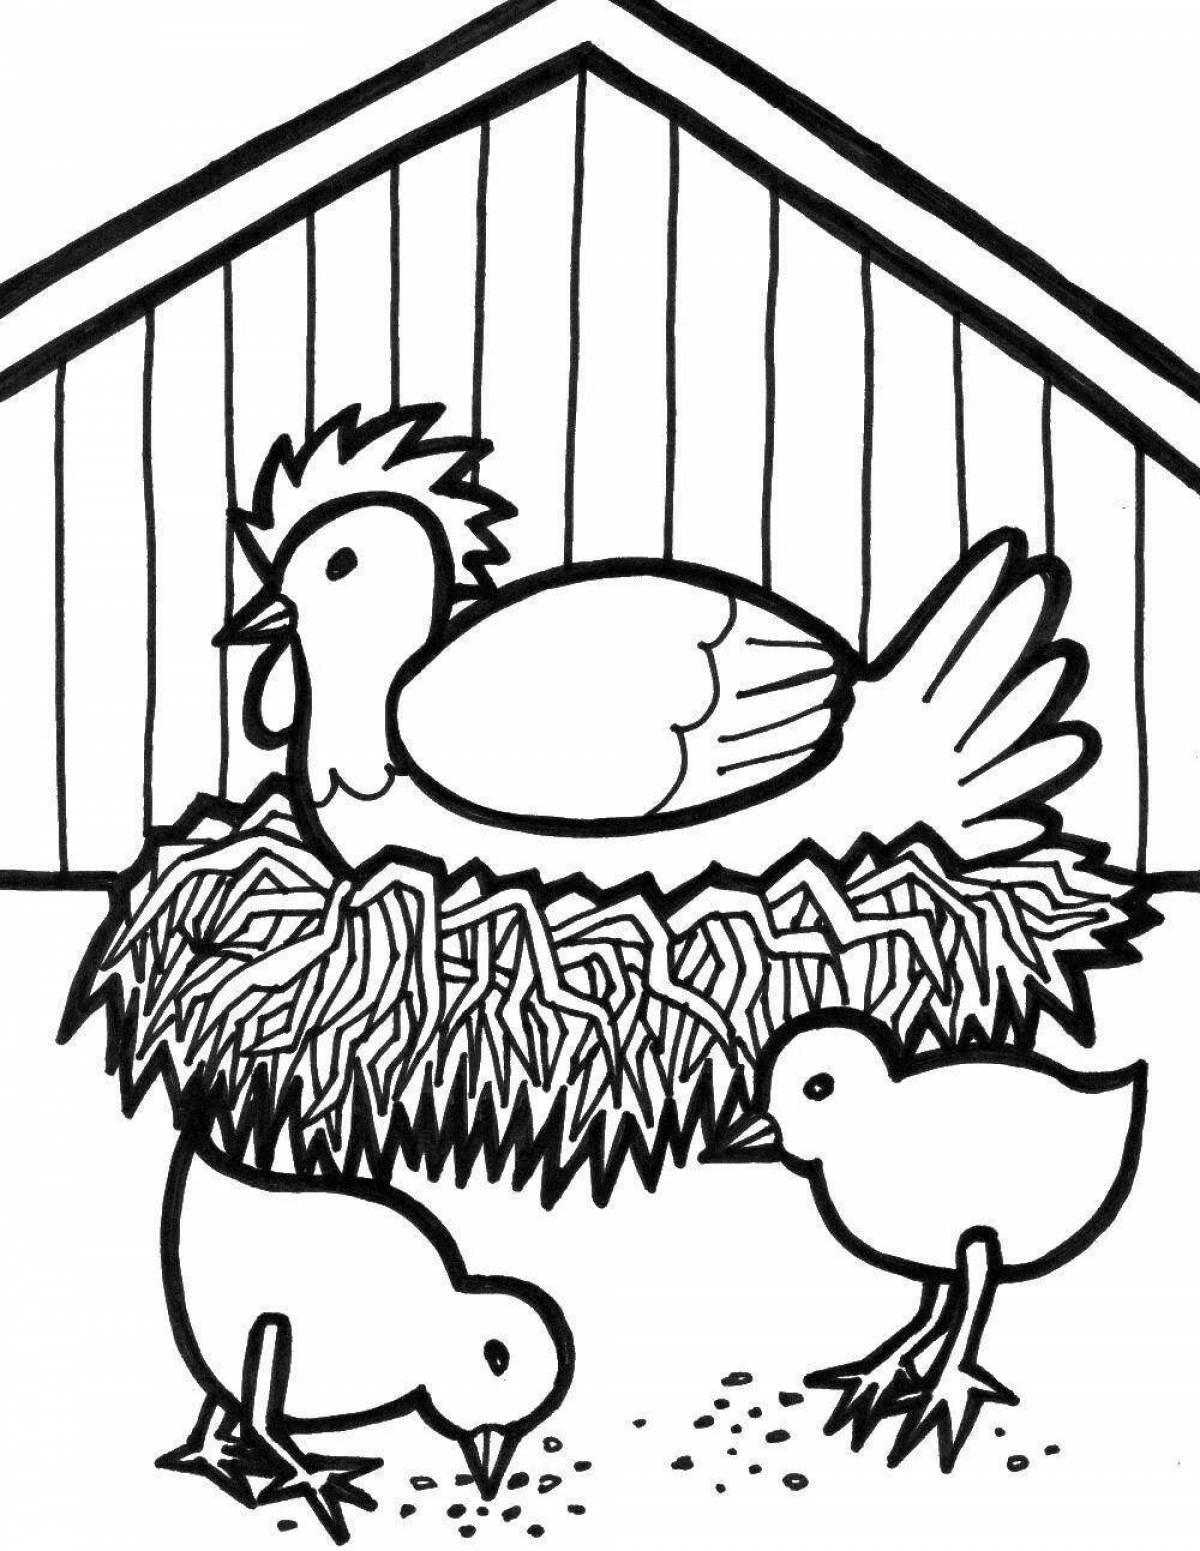 Adorable animal house coloring page